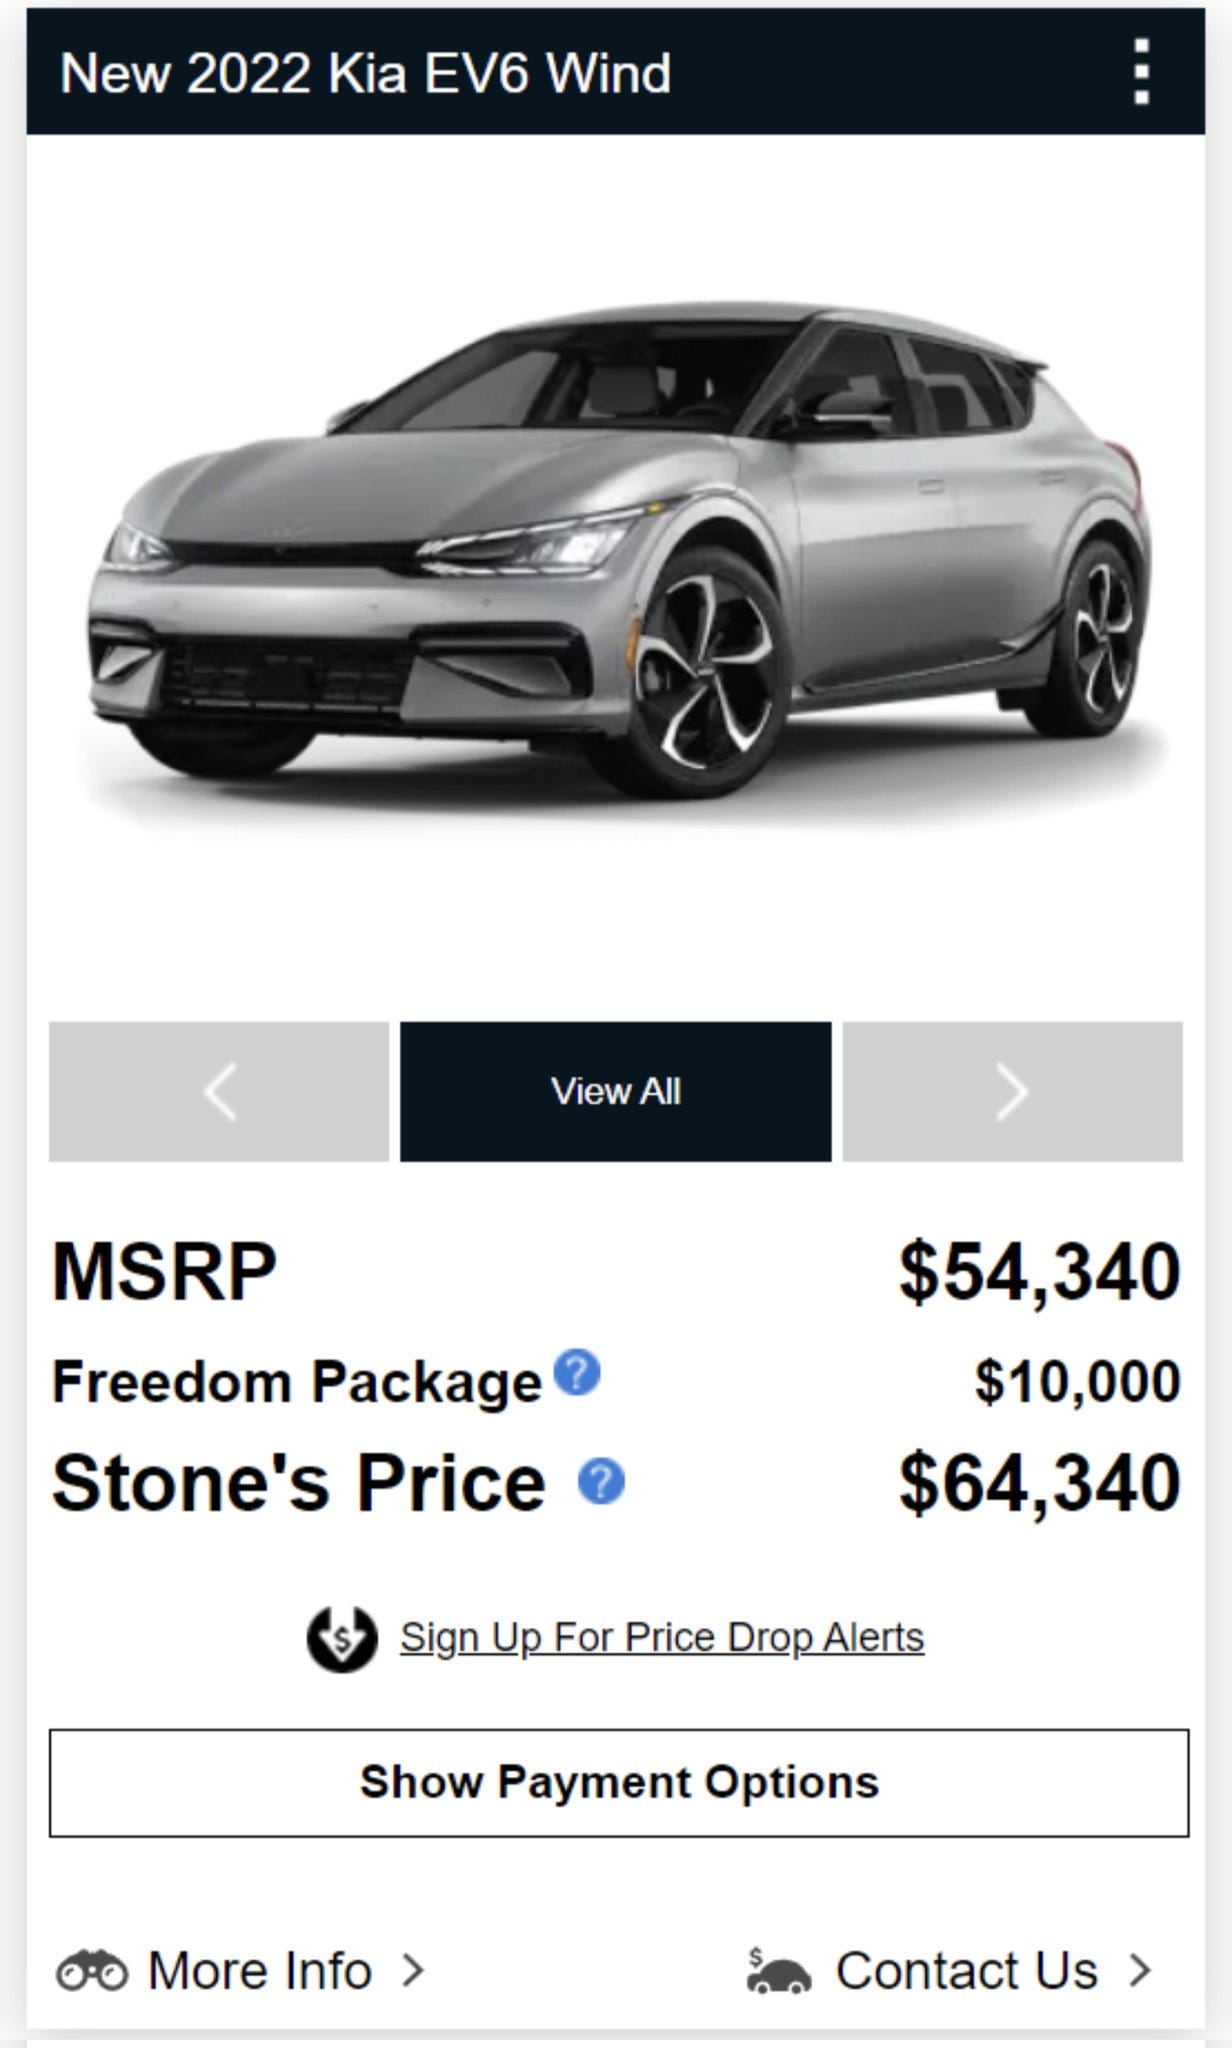 A car ad for a Kia with an option reading FREEDOM PACKAGE: $10,000